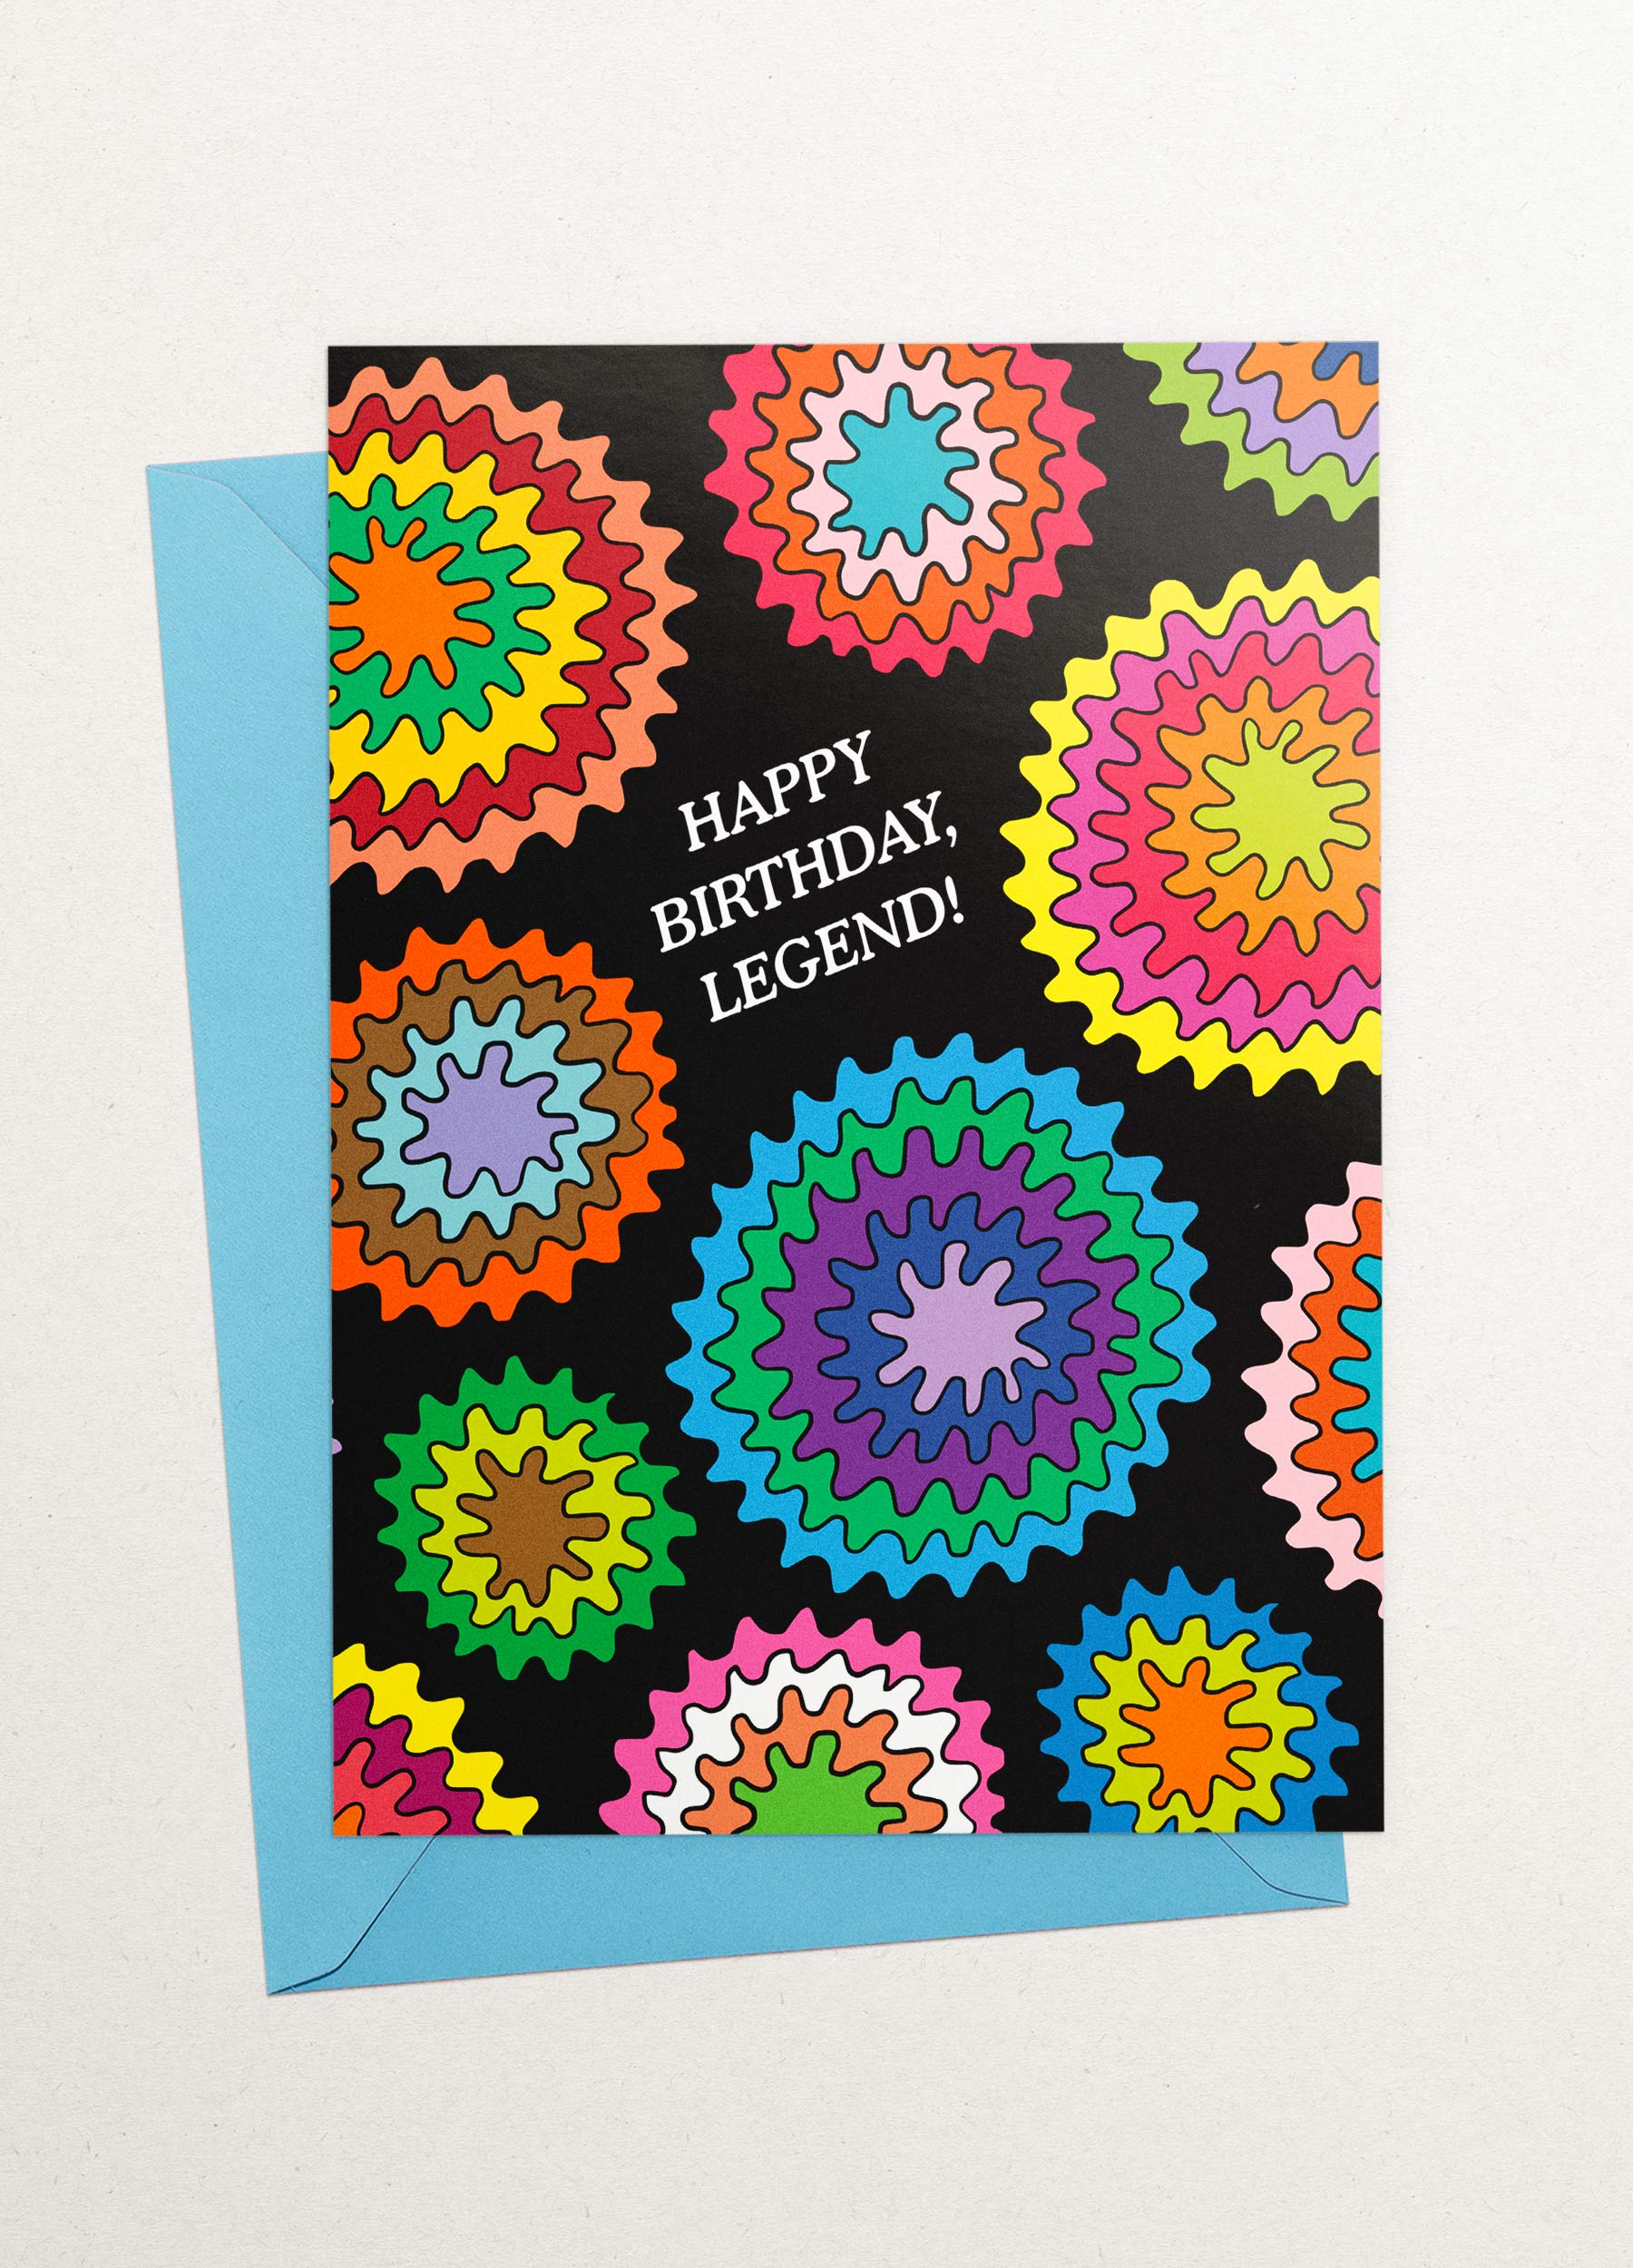 This image is a greeting card by Kiosk that has a black background and a circular wavey burst design. The design has different burst patterns and shapes in pink, orange, green, blue, and purple. The card also has a white text that says “Happy Birthday, Legend!” in a fun and casual font. The card has a playful and cheerful design that conveys a message of celebration and compliments for your birthday. 🎂 Partly showing behind it is a light blue envelope.